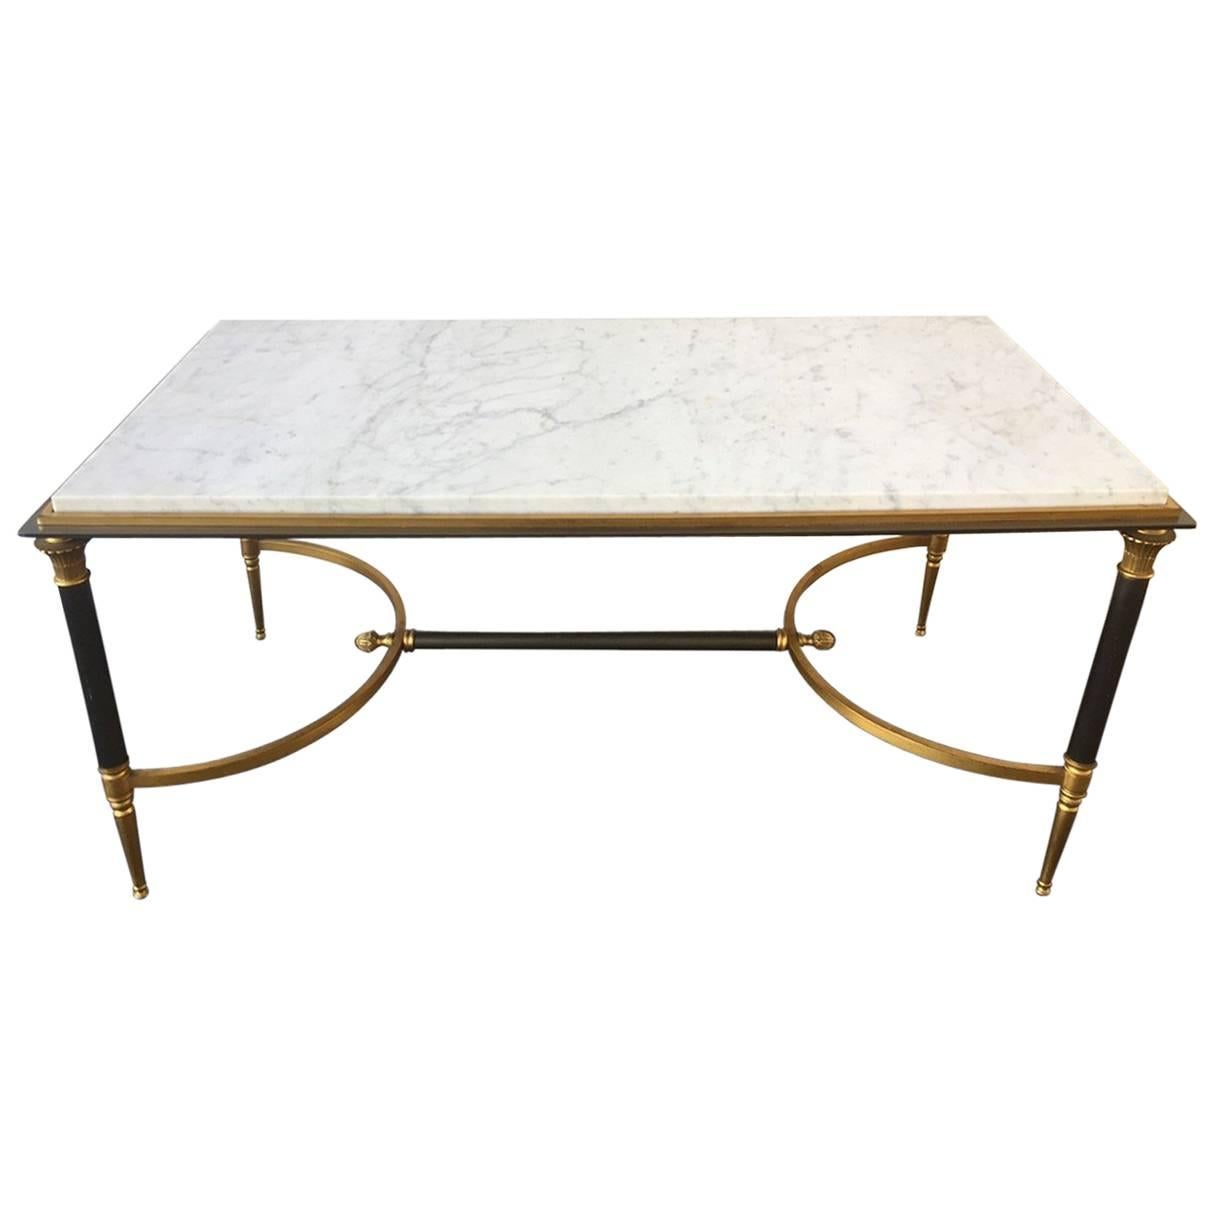 Rare Directoire Coffee Table with Unusual Marble Top by Maison Charles